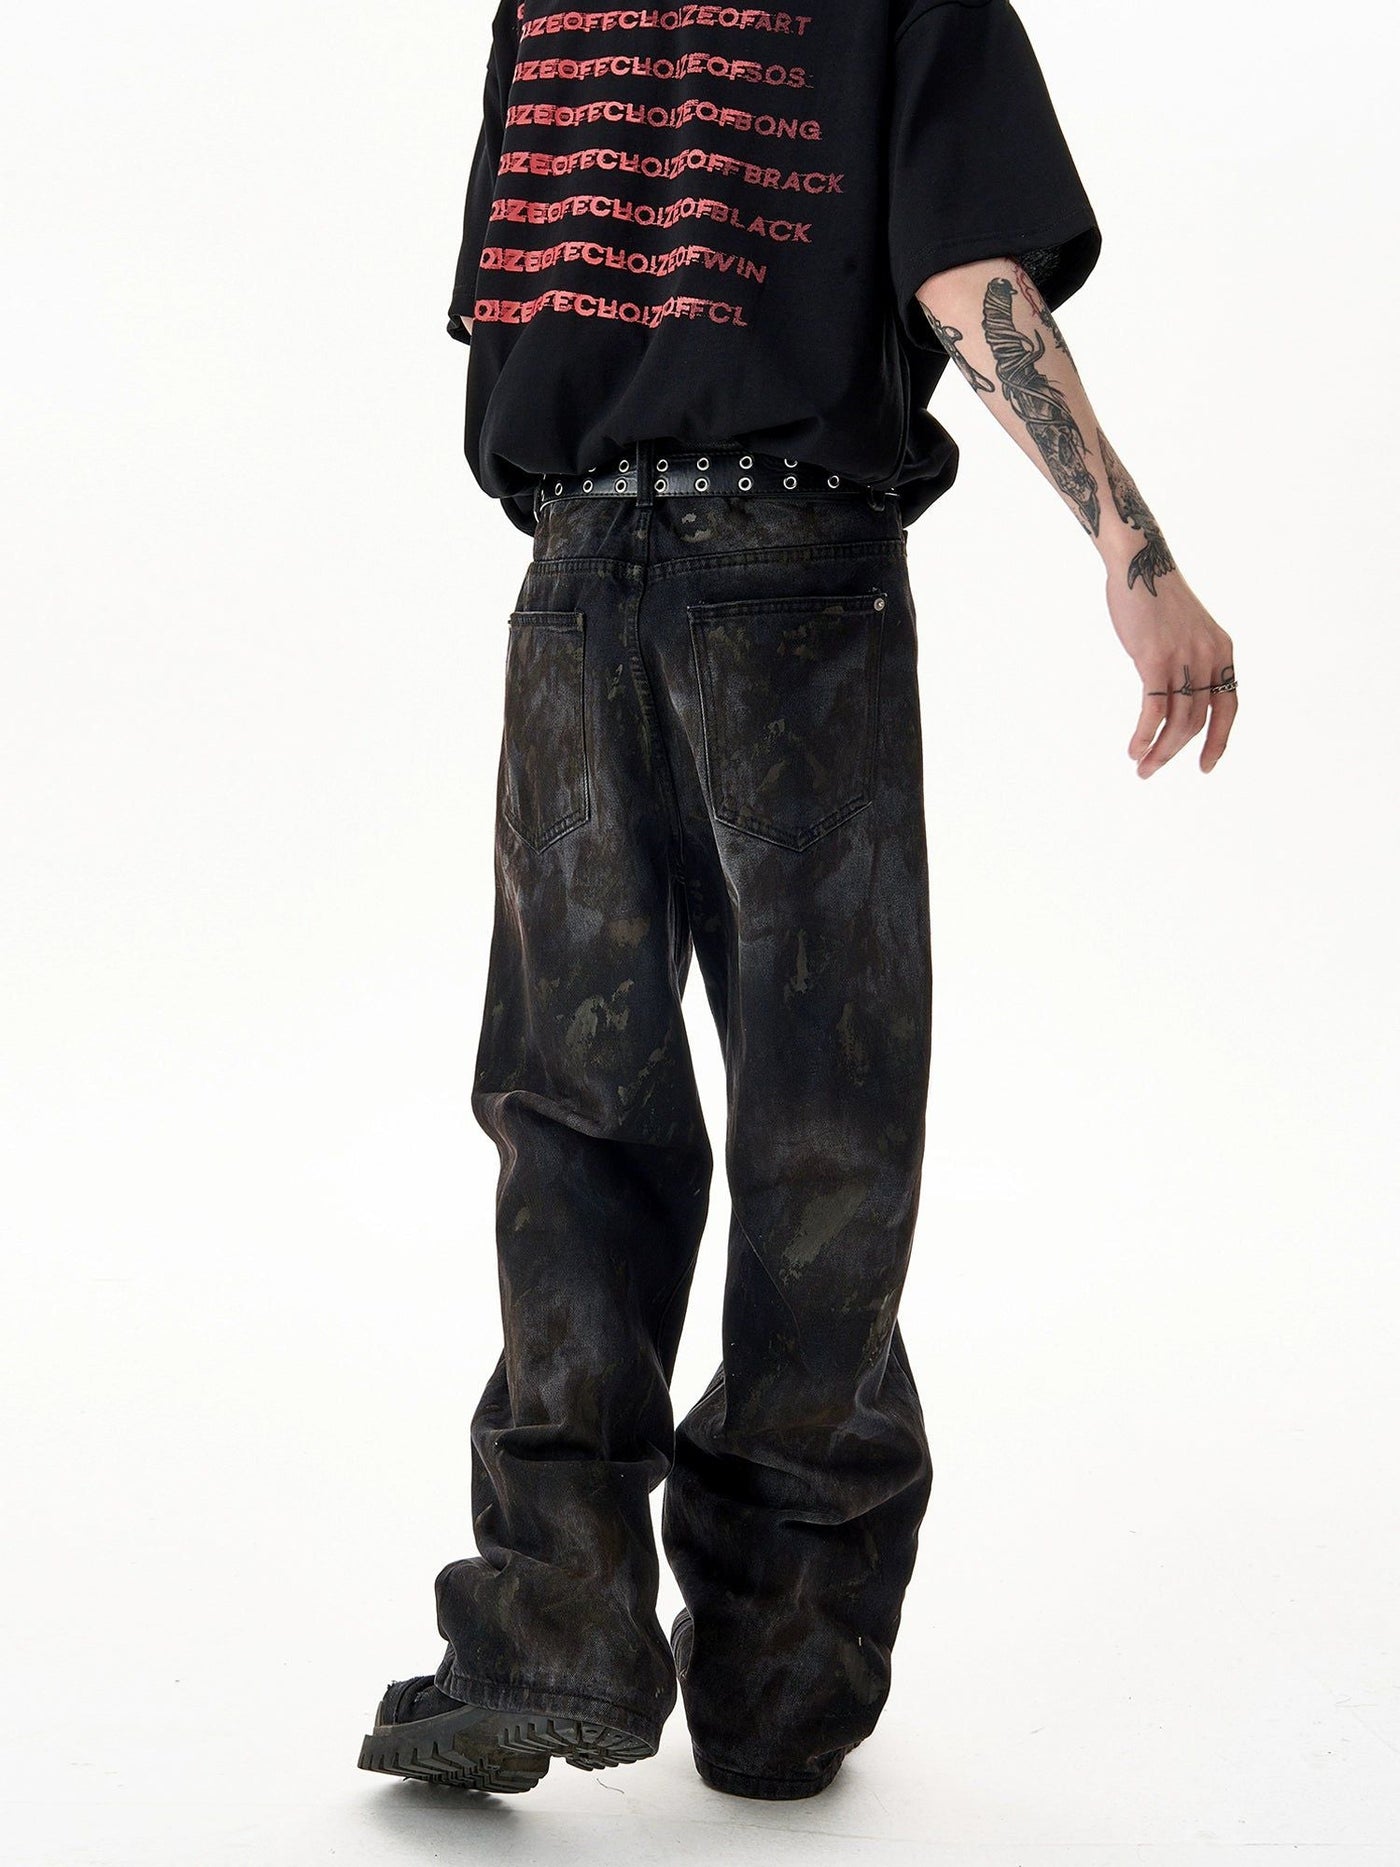 Washed Dirty Fit Straight Jeans Korean Street Fashion Jeans By Ash Dark Shop Online at OH Vault